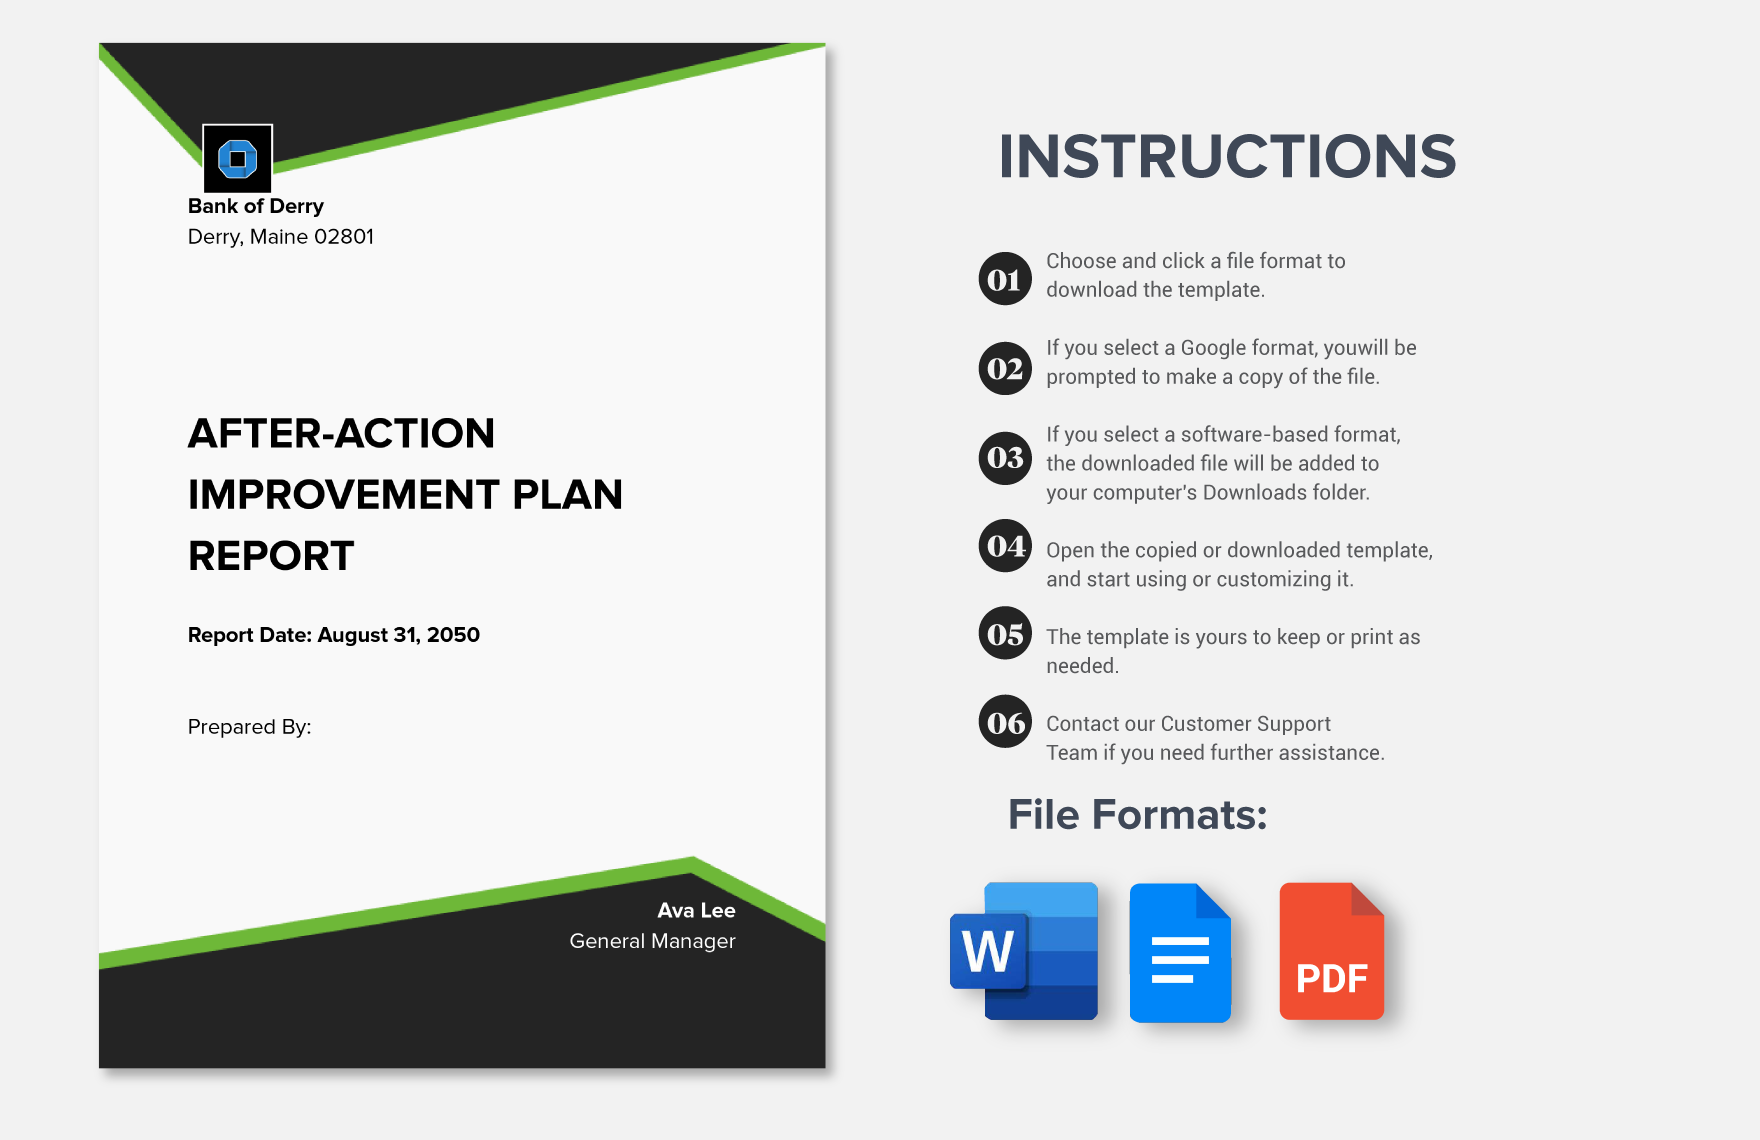 After-Action Improvement Plan Report Template